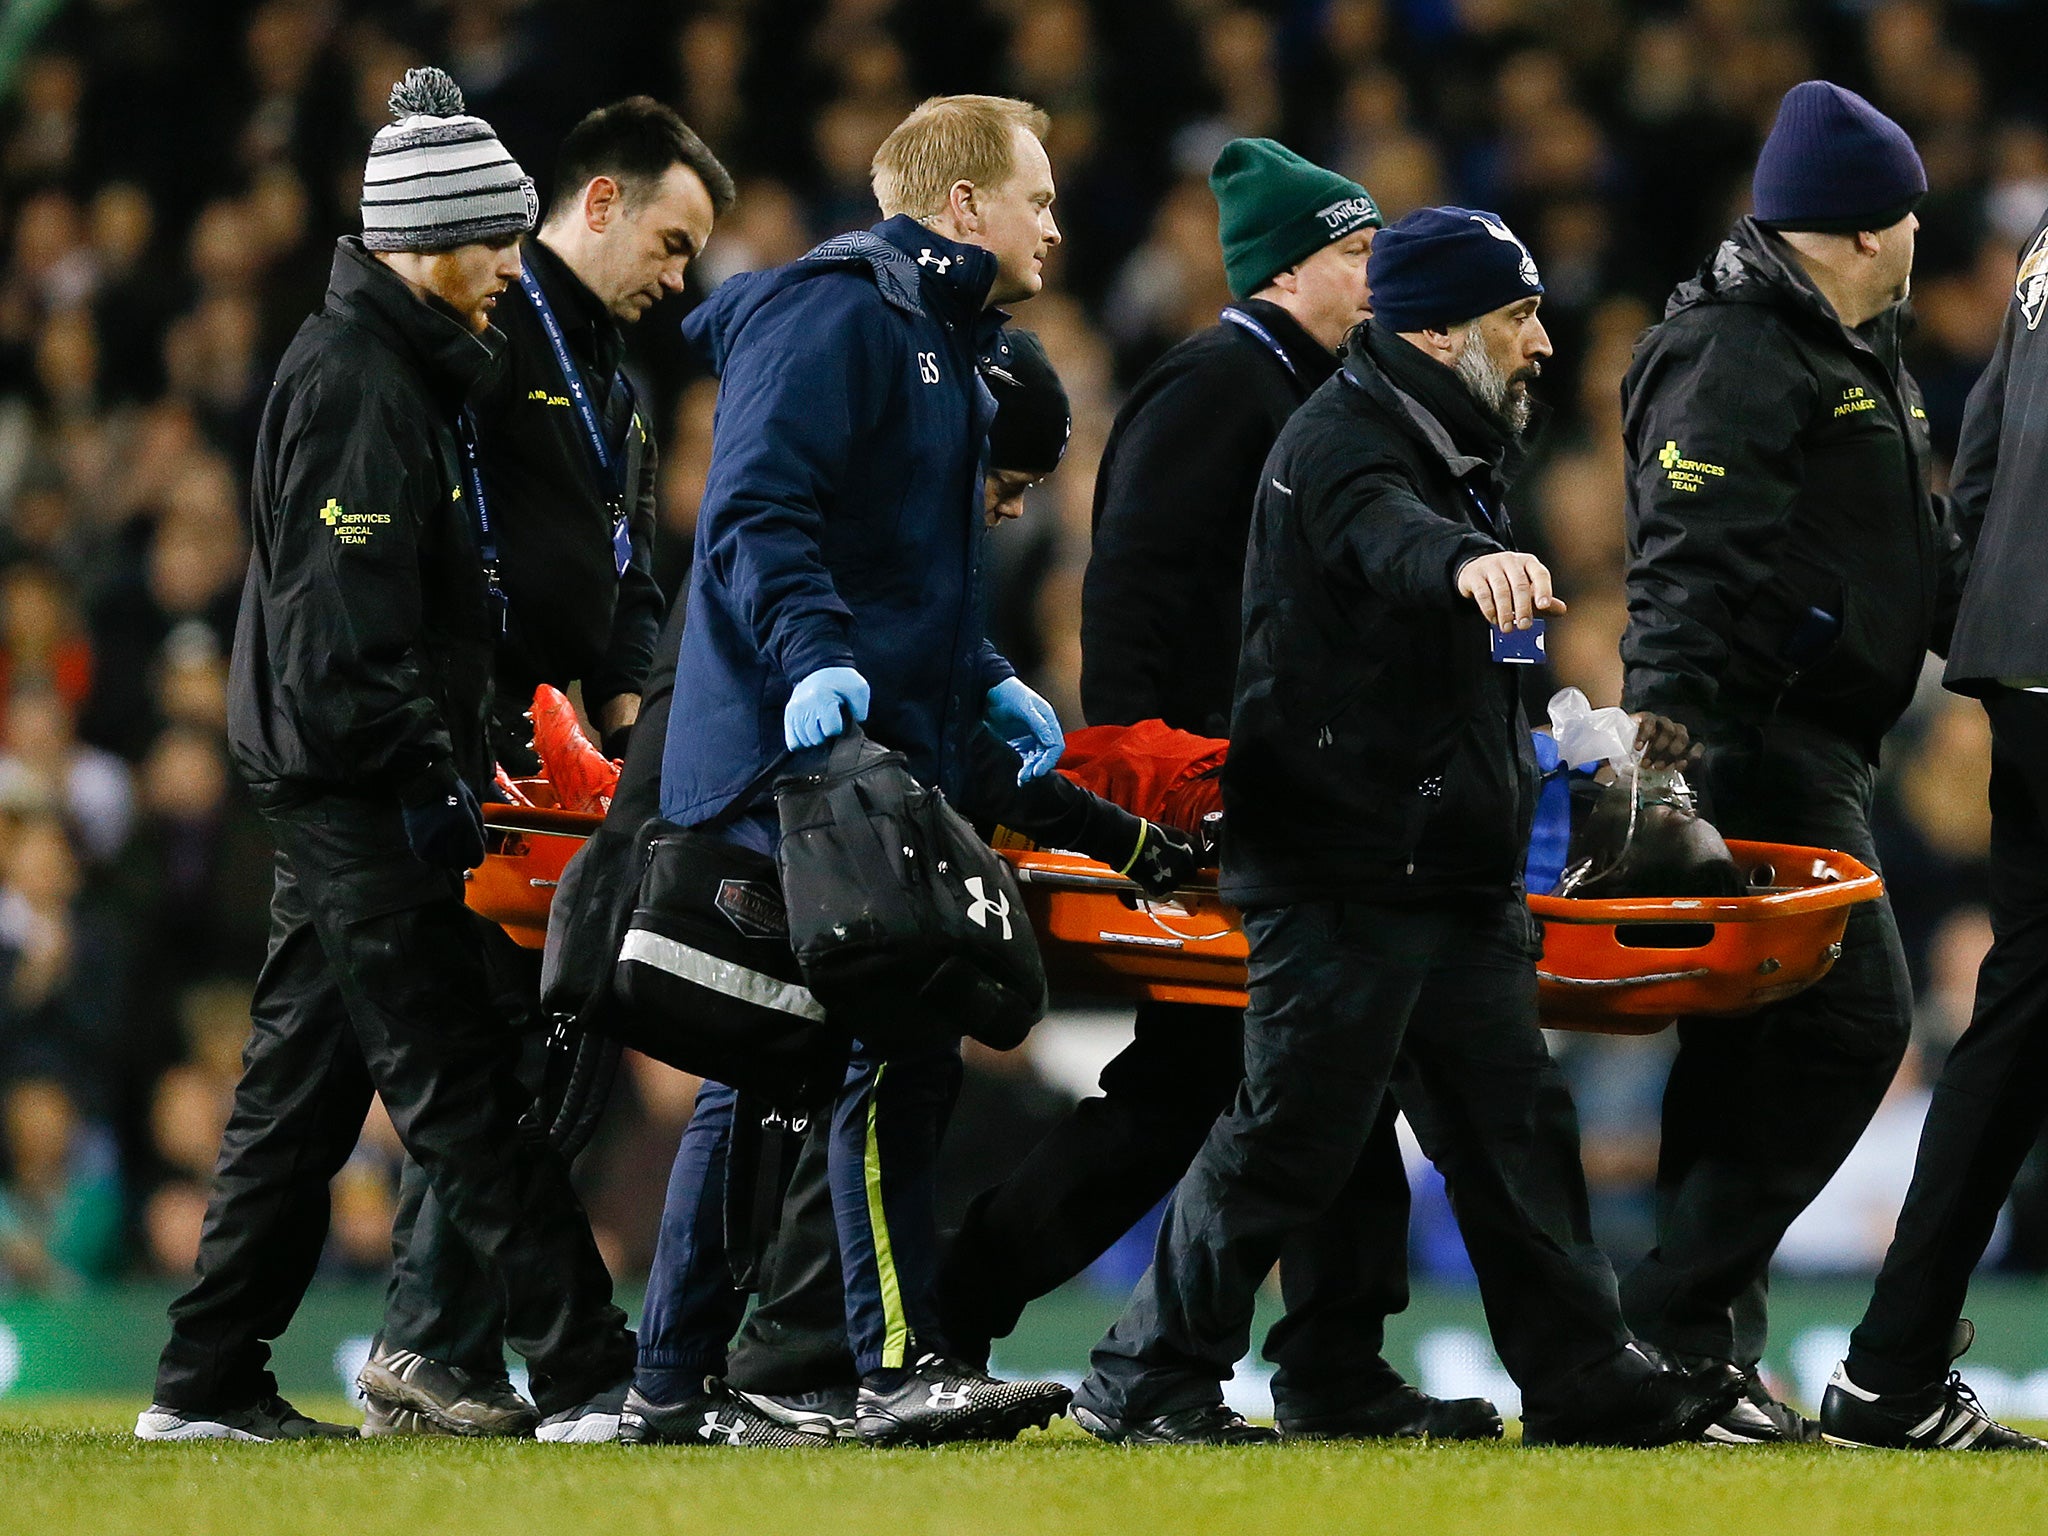 Bafetimbi Gomis is carried off at White Hart Lane after a fainting episode which cause much alarm at the time